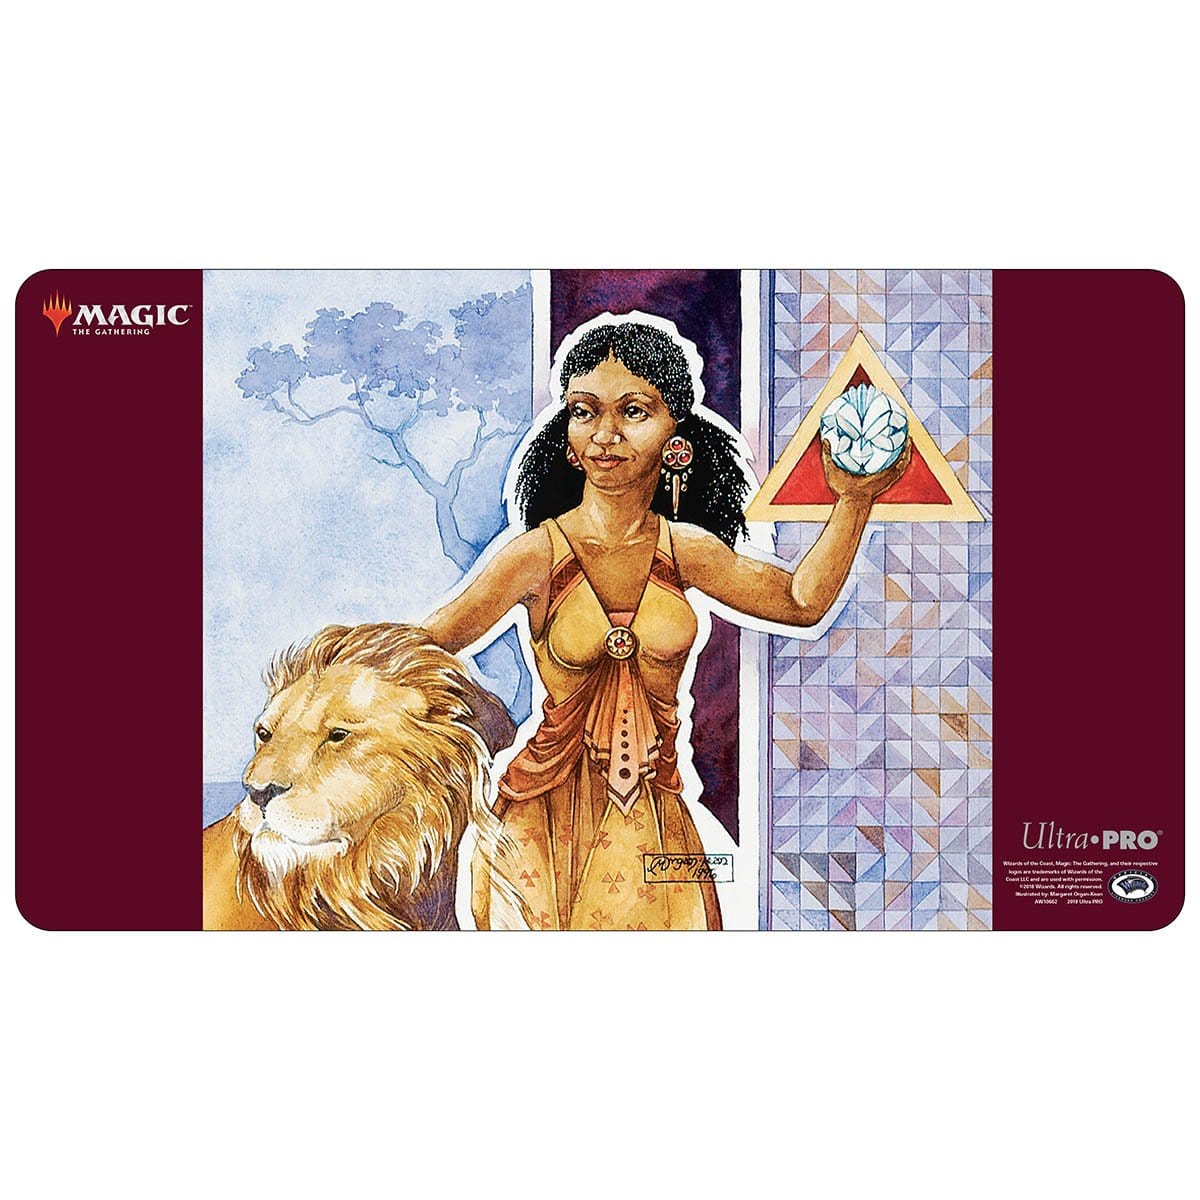 Lion&#39;s Eye Diamond Playmat - Playmat - Original Magic Art - Accessories for Magic the Gathering and other card games